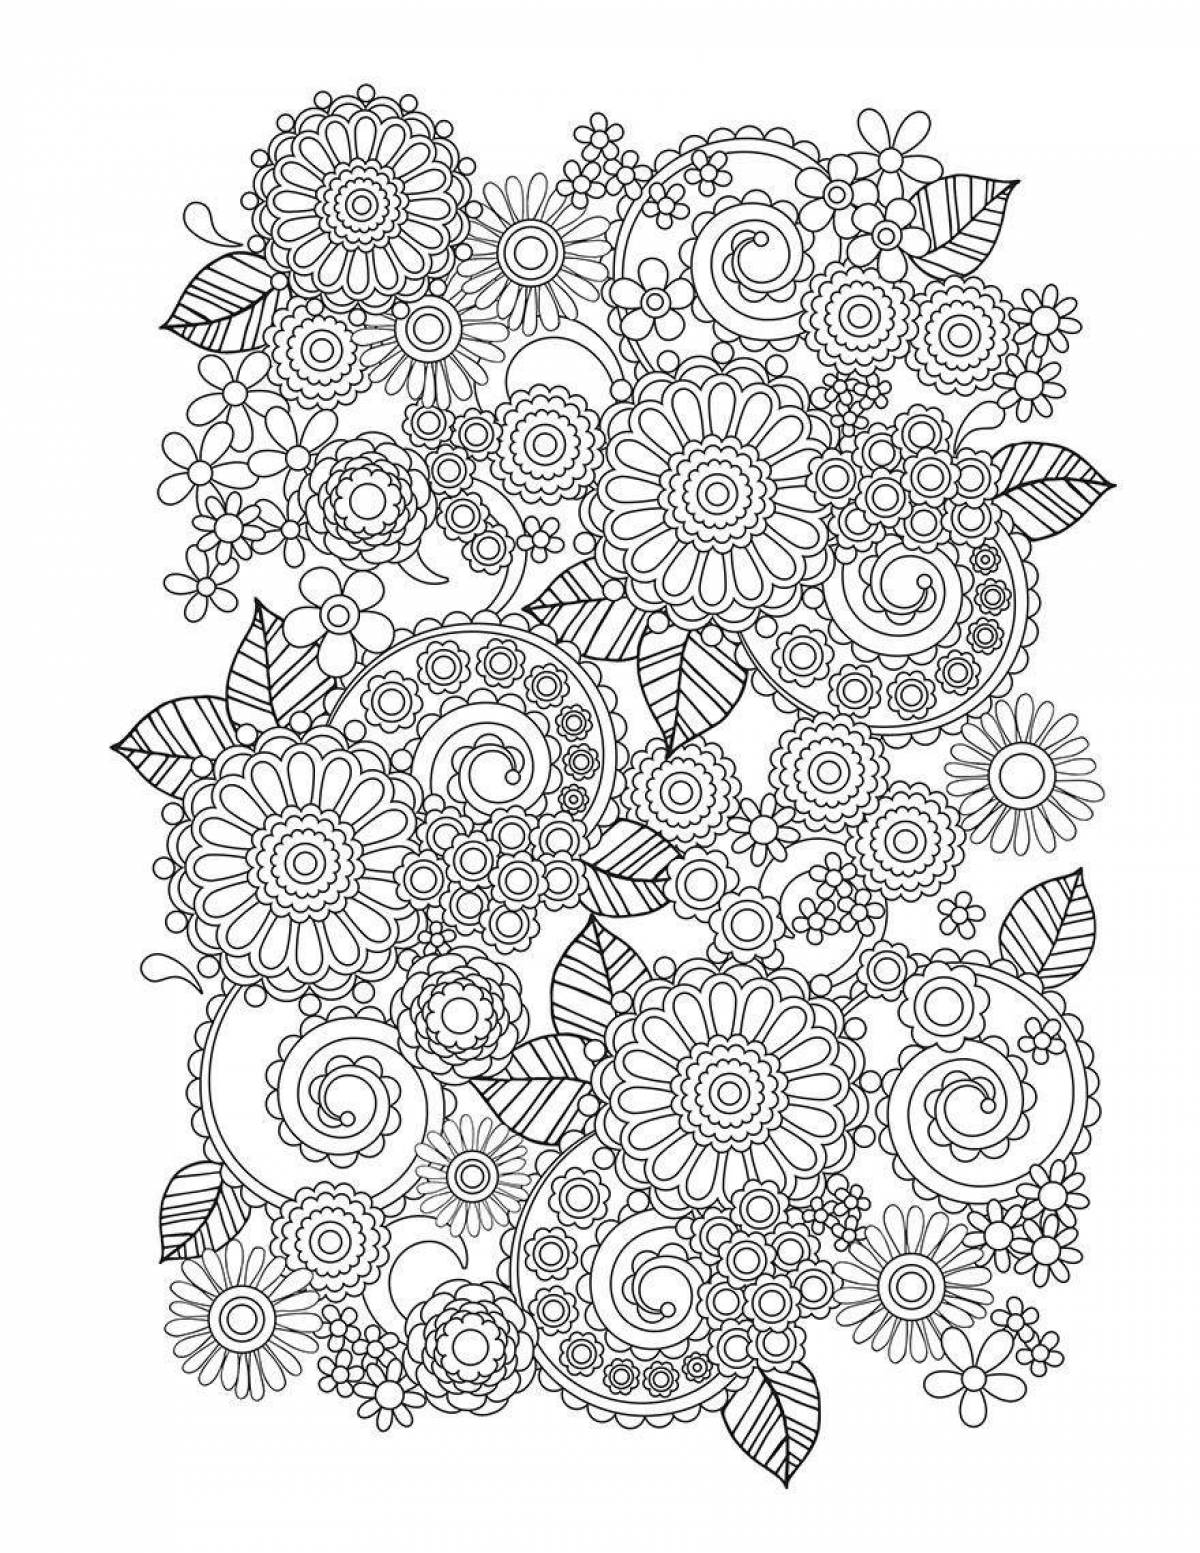 Soothing anti-stress coloring book pdf